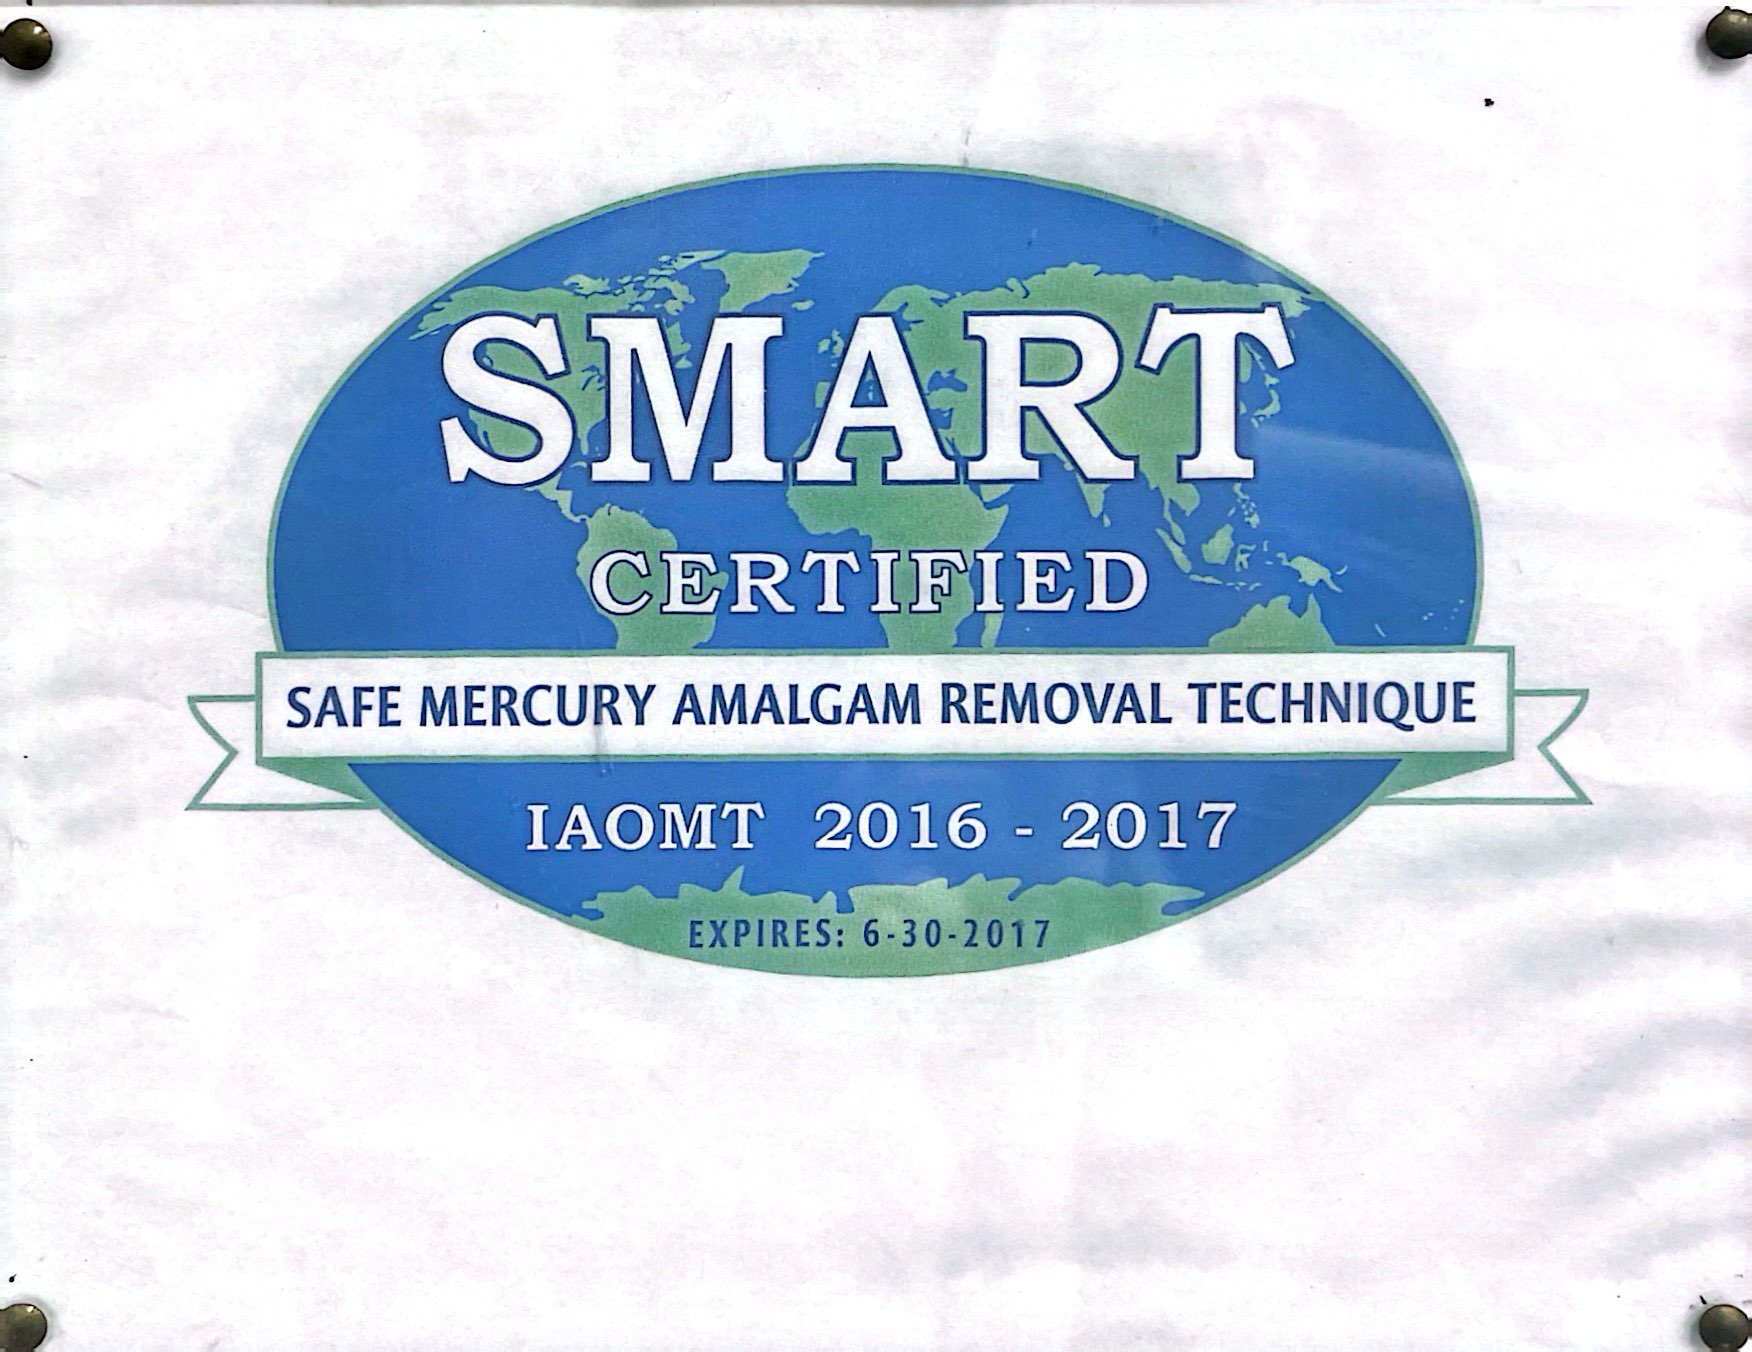 A certification banner for the SMART technique, indicating safe mercury amalgam removal, valid from 2016 to 2017.